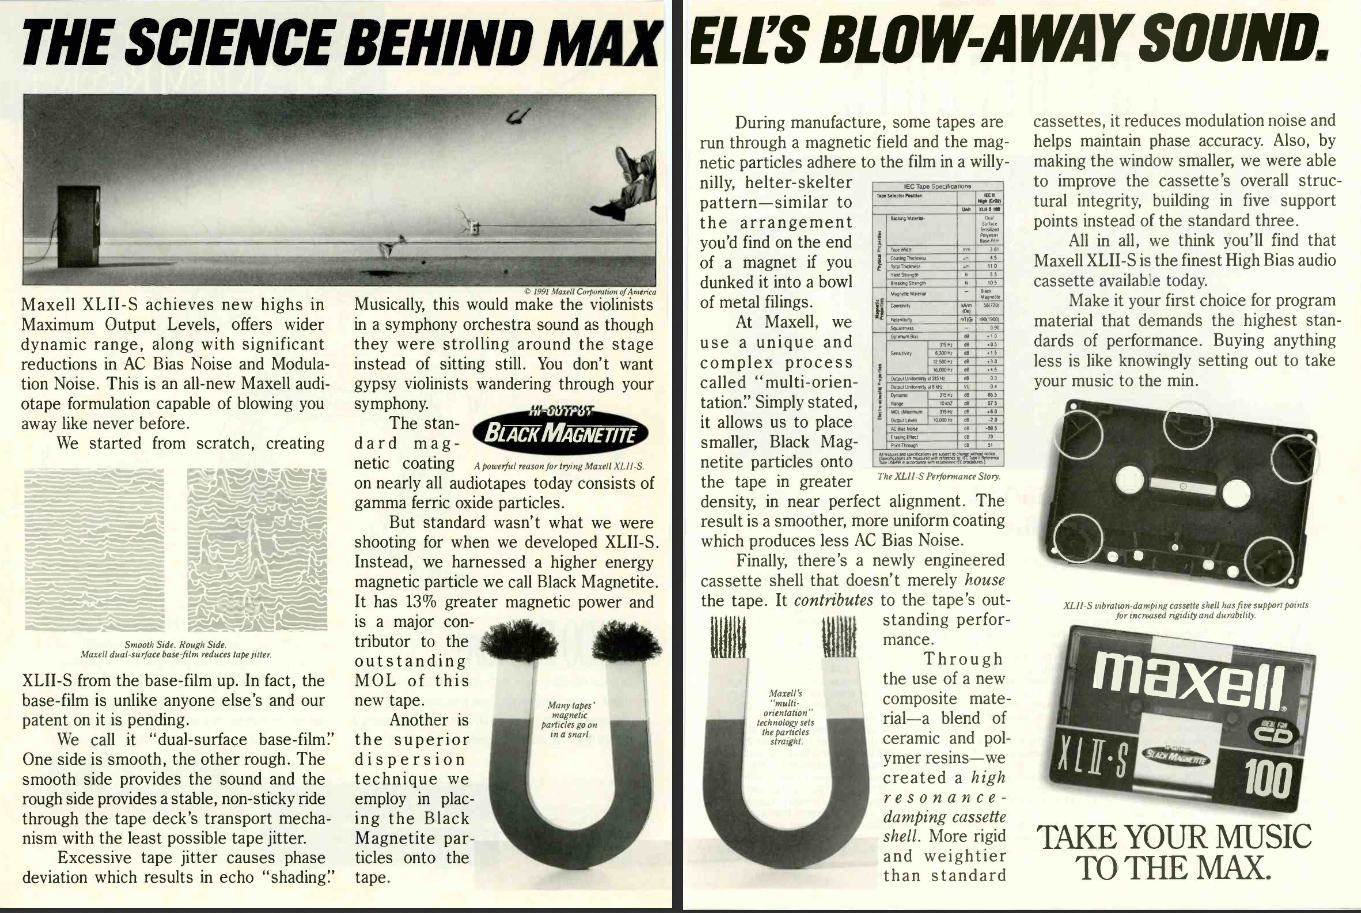 Maxell XL II S Stereo-Review-1991-11 pdf.png